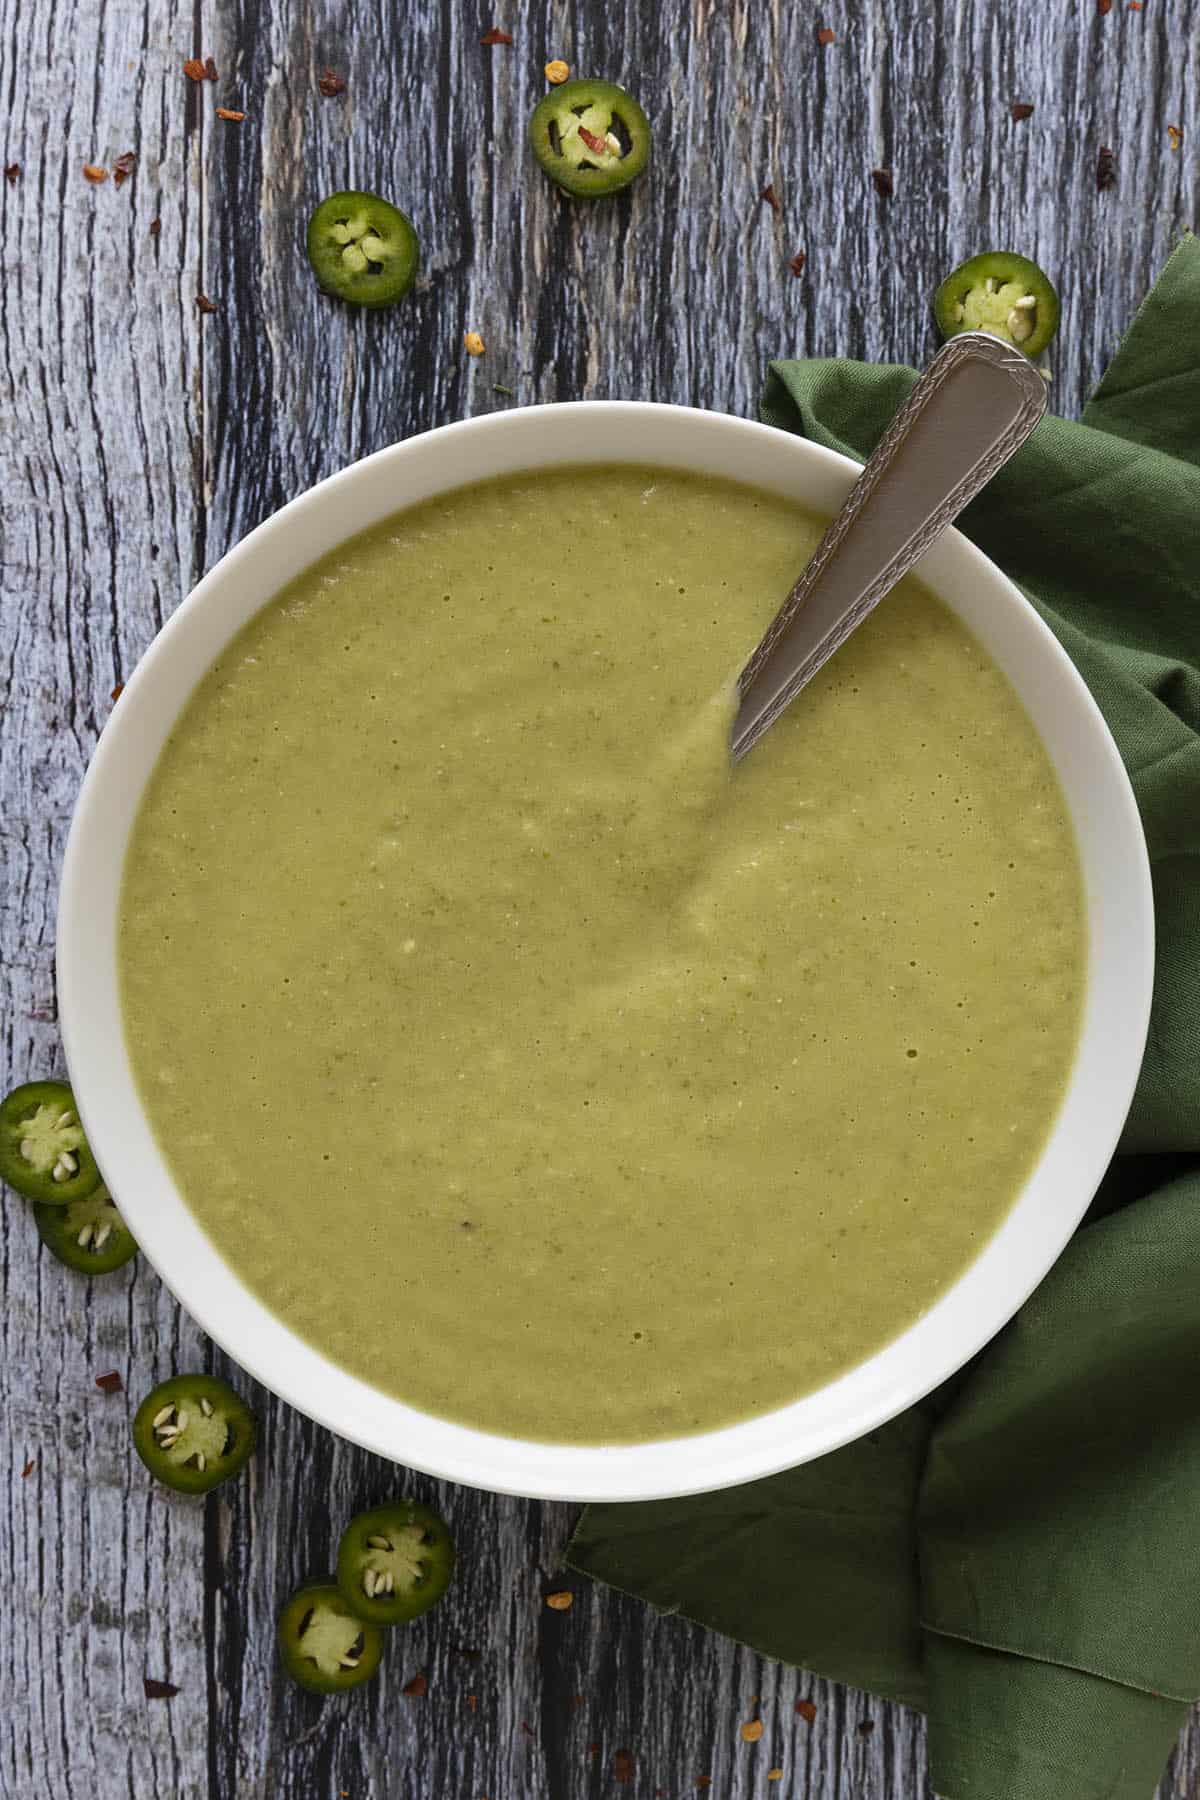 Creamy Jalapeno Sauce in a bowl, ready to serve